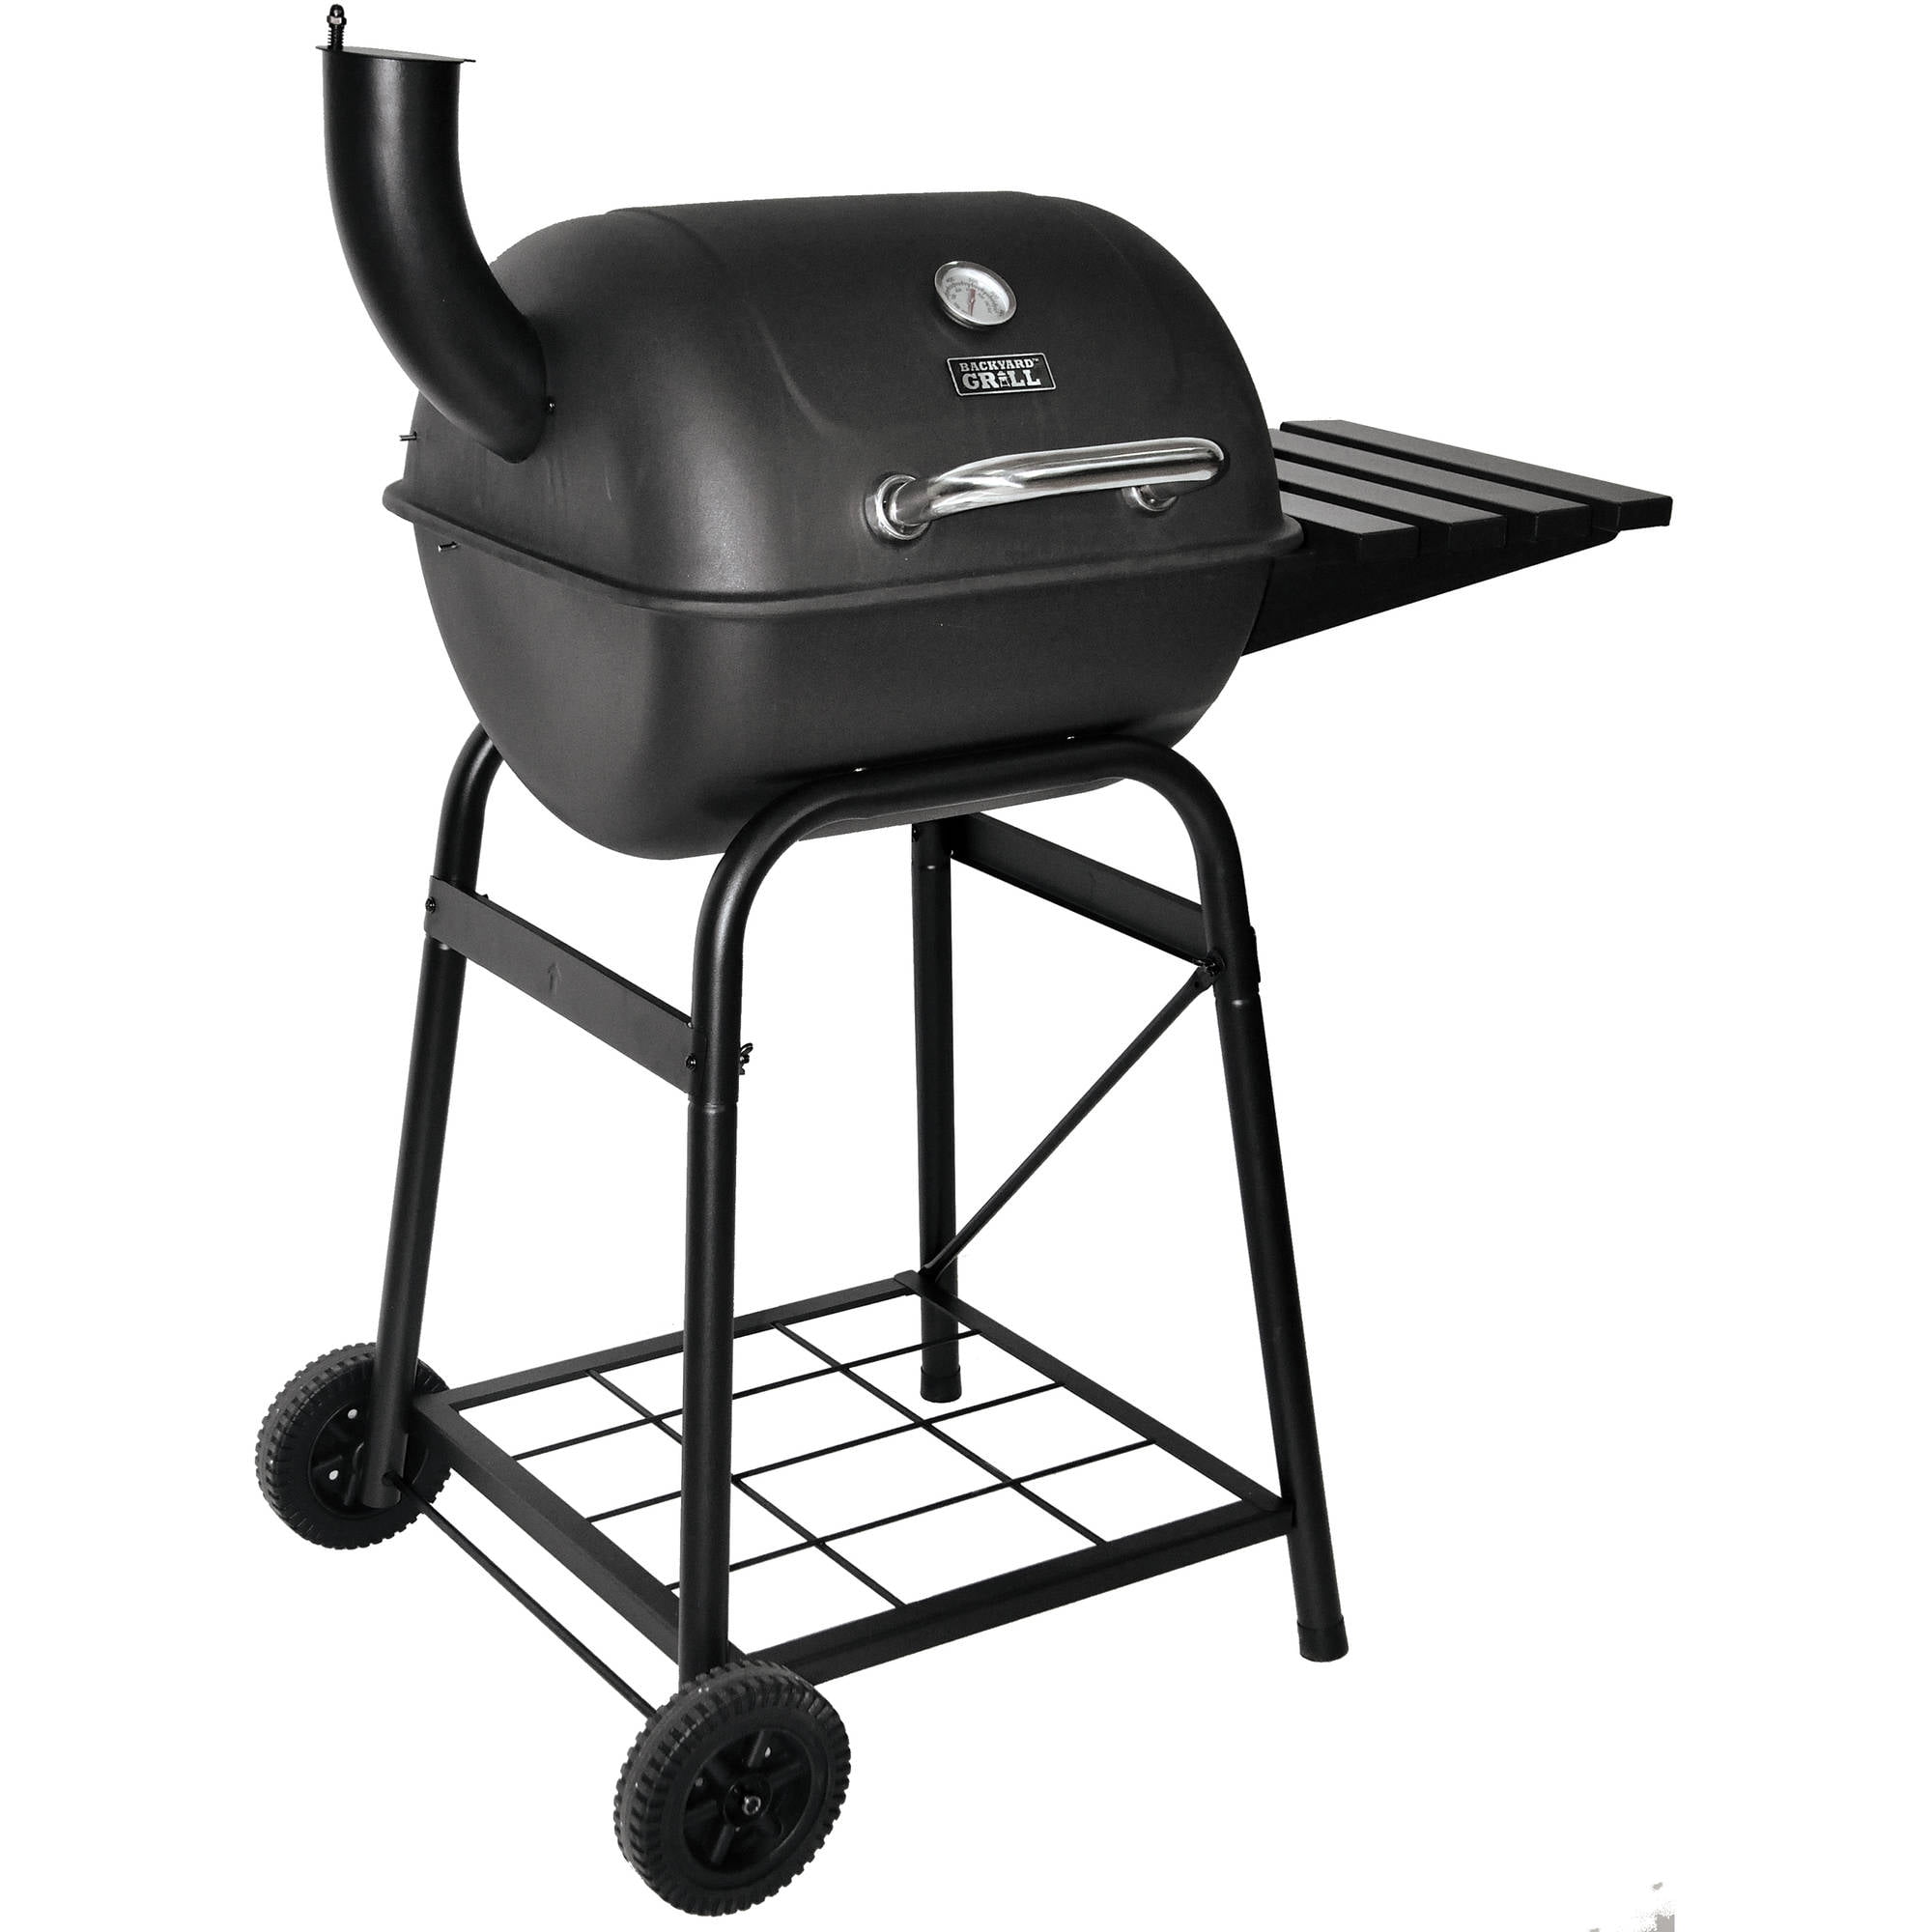 Top Rated Products In Charcoal Grills Walmartcom